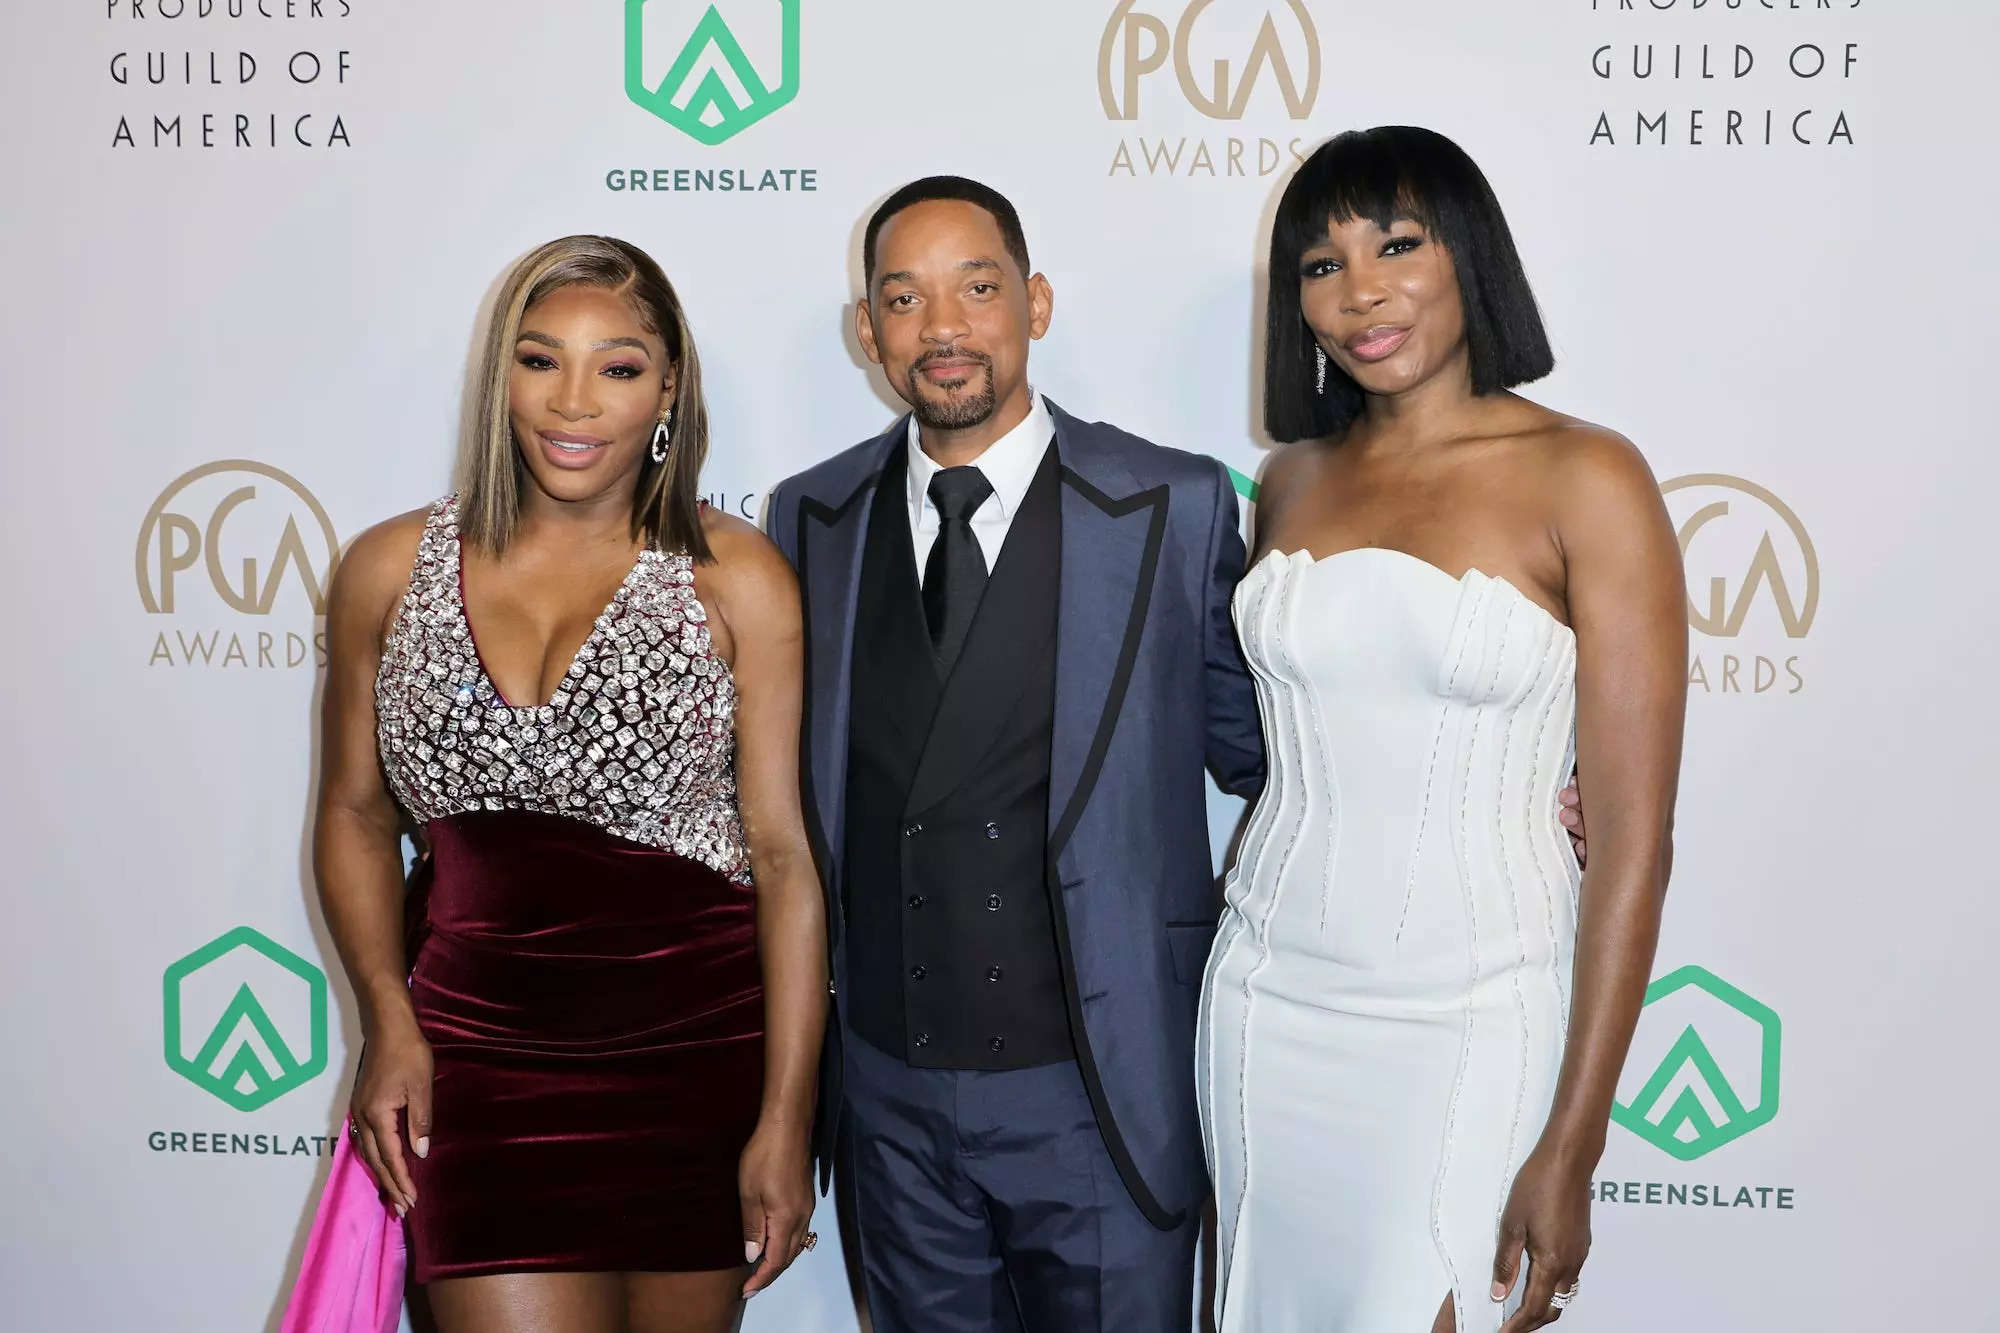 Will Smith apologized to Serena and Venus Williams after slapping Chris  Rock at the Oscars | Business Insider India